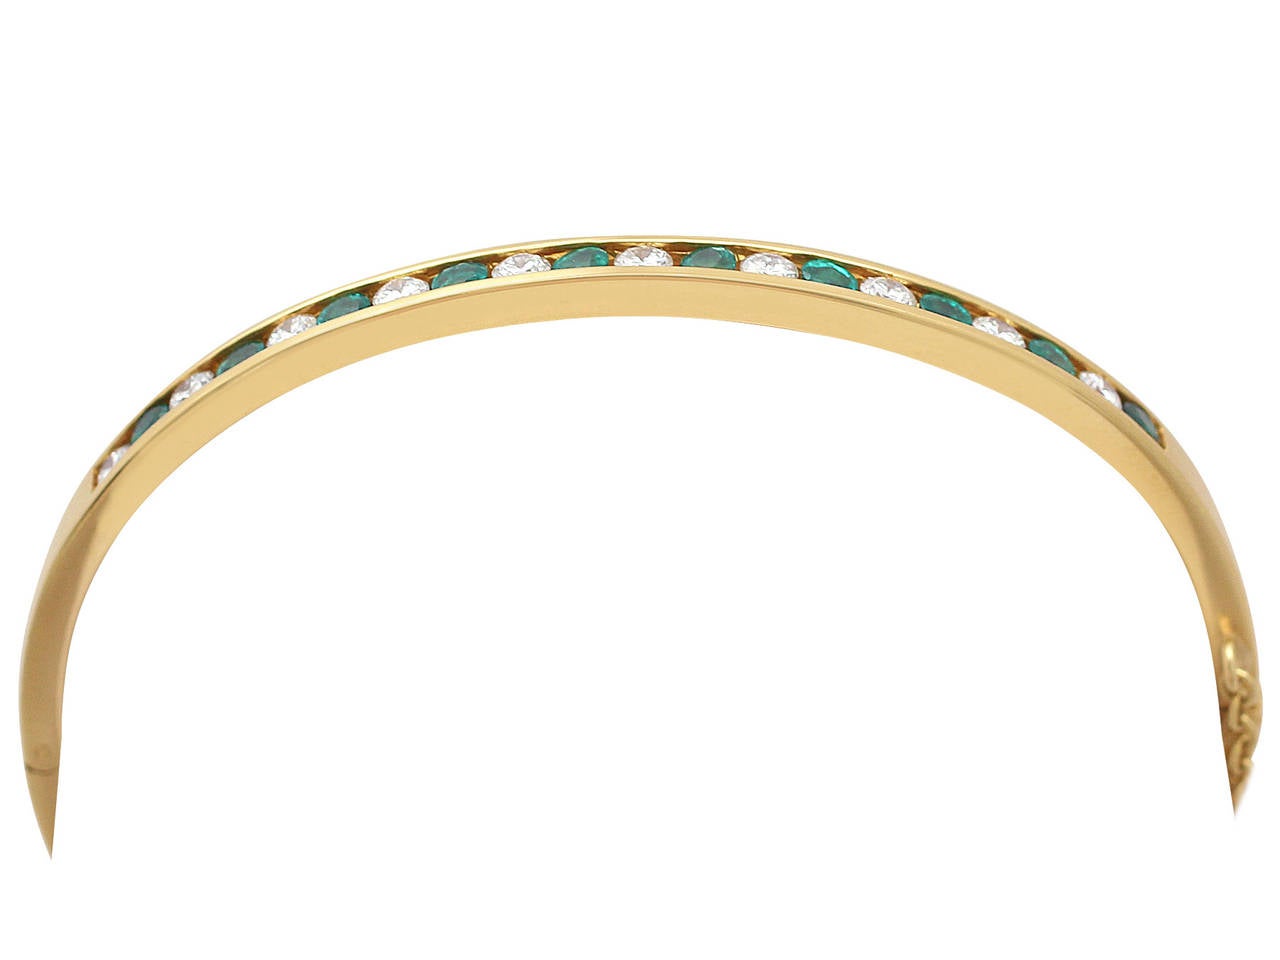 A fine and impressive 0.70 carat diamond and 0.55 carat natural emerald and 18 karat yellow gold bangle; part of our contemporary jewelry and jewelry collections

This impressive contemporary emerald and diamond bangle has been crafted in 18k yellow